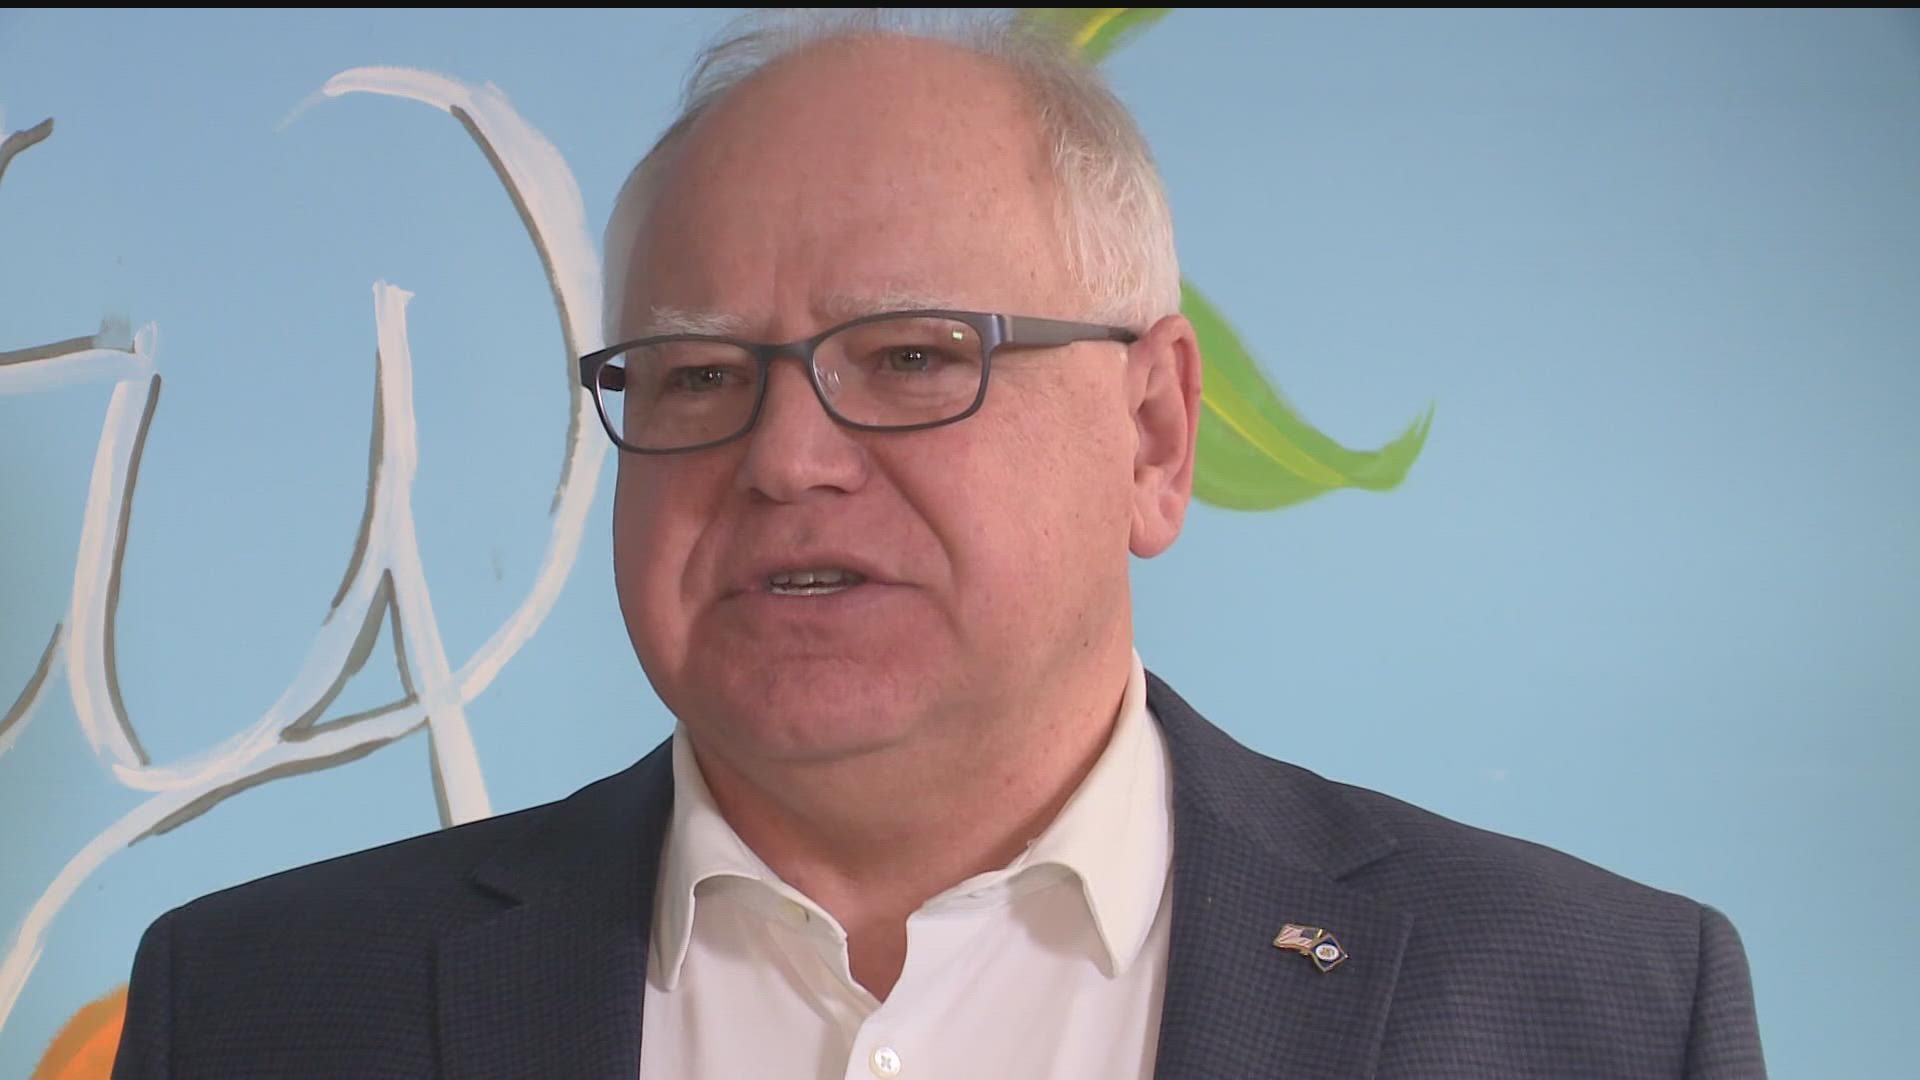 On Tuesday, Gov. Tim Walz advocated for paid family and medical leave, while opponents argued a new policy could make it hard for businesses to stay afloat.